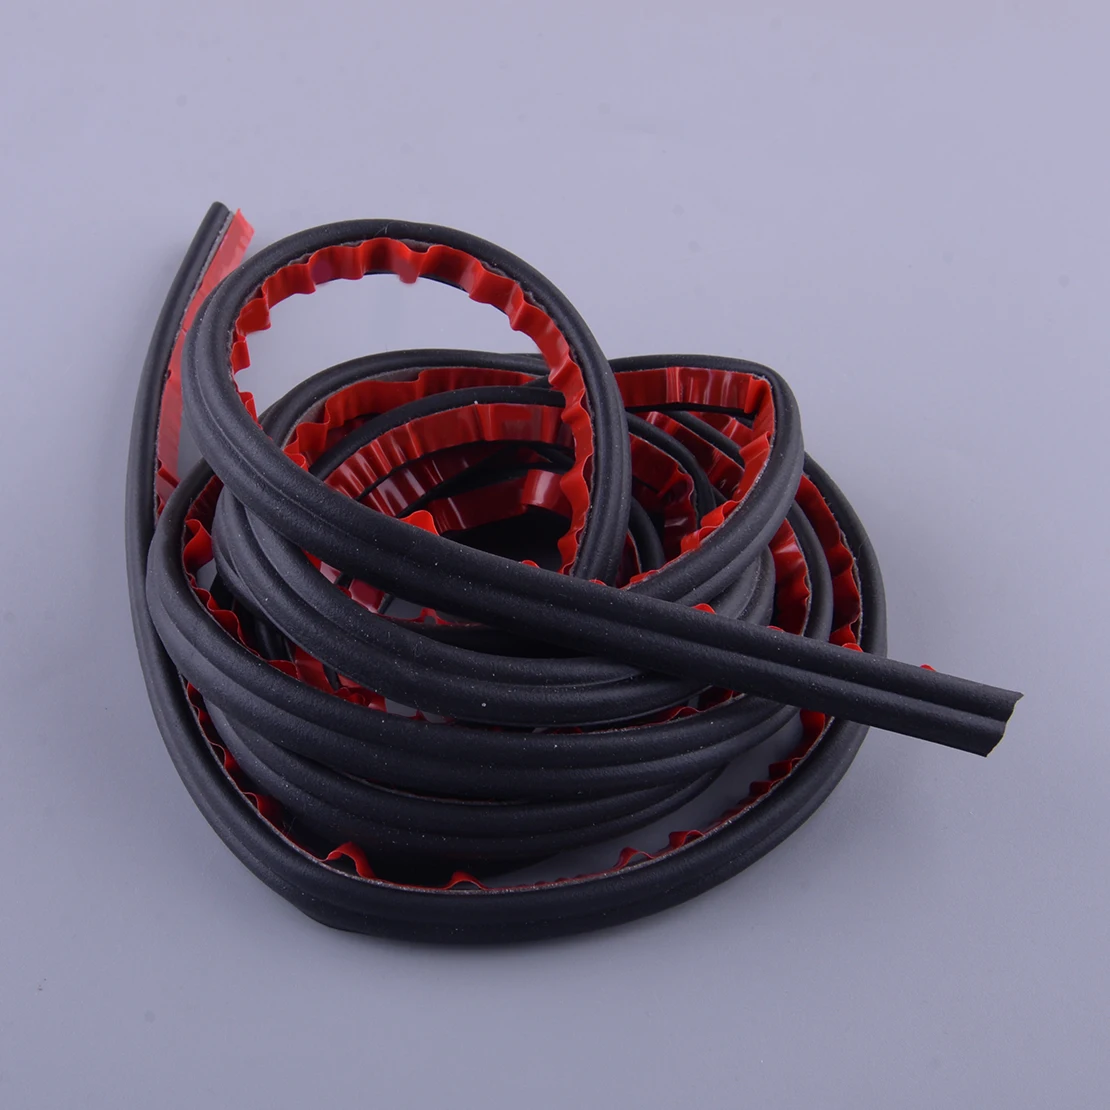 

NEW Double Layer Seal Car Front Rear Door Trunk Weather Strip Edge Moulding Rubber Consistency Harmless Universal 10M